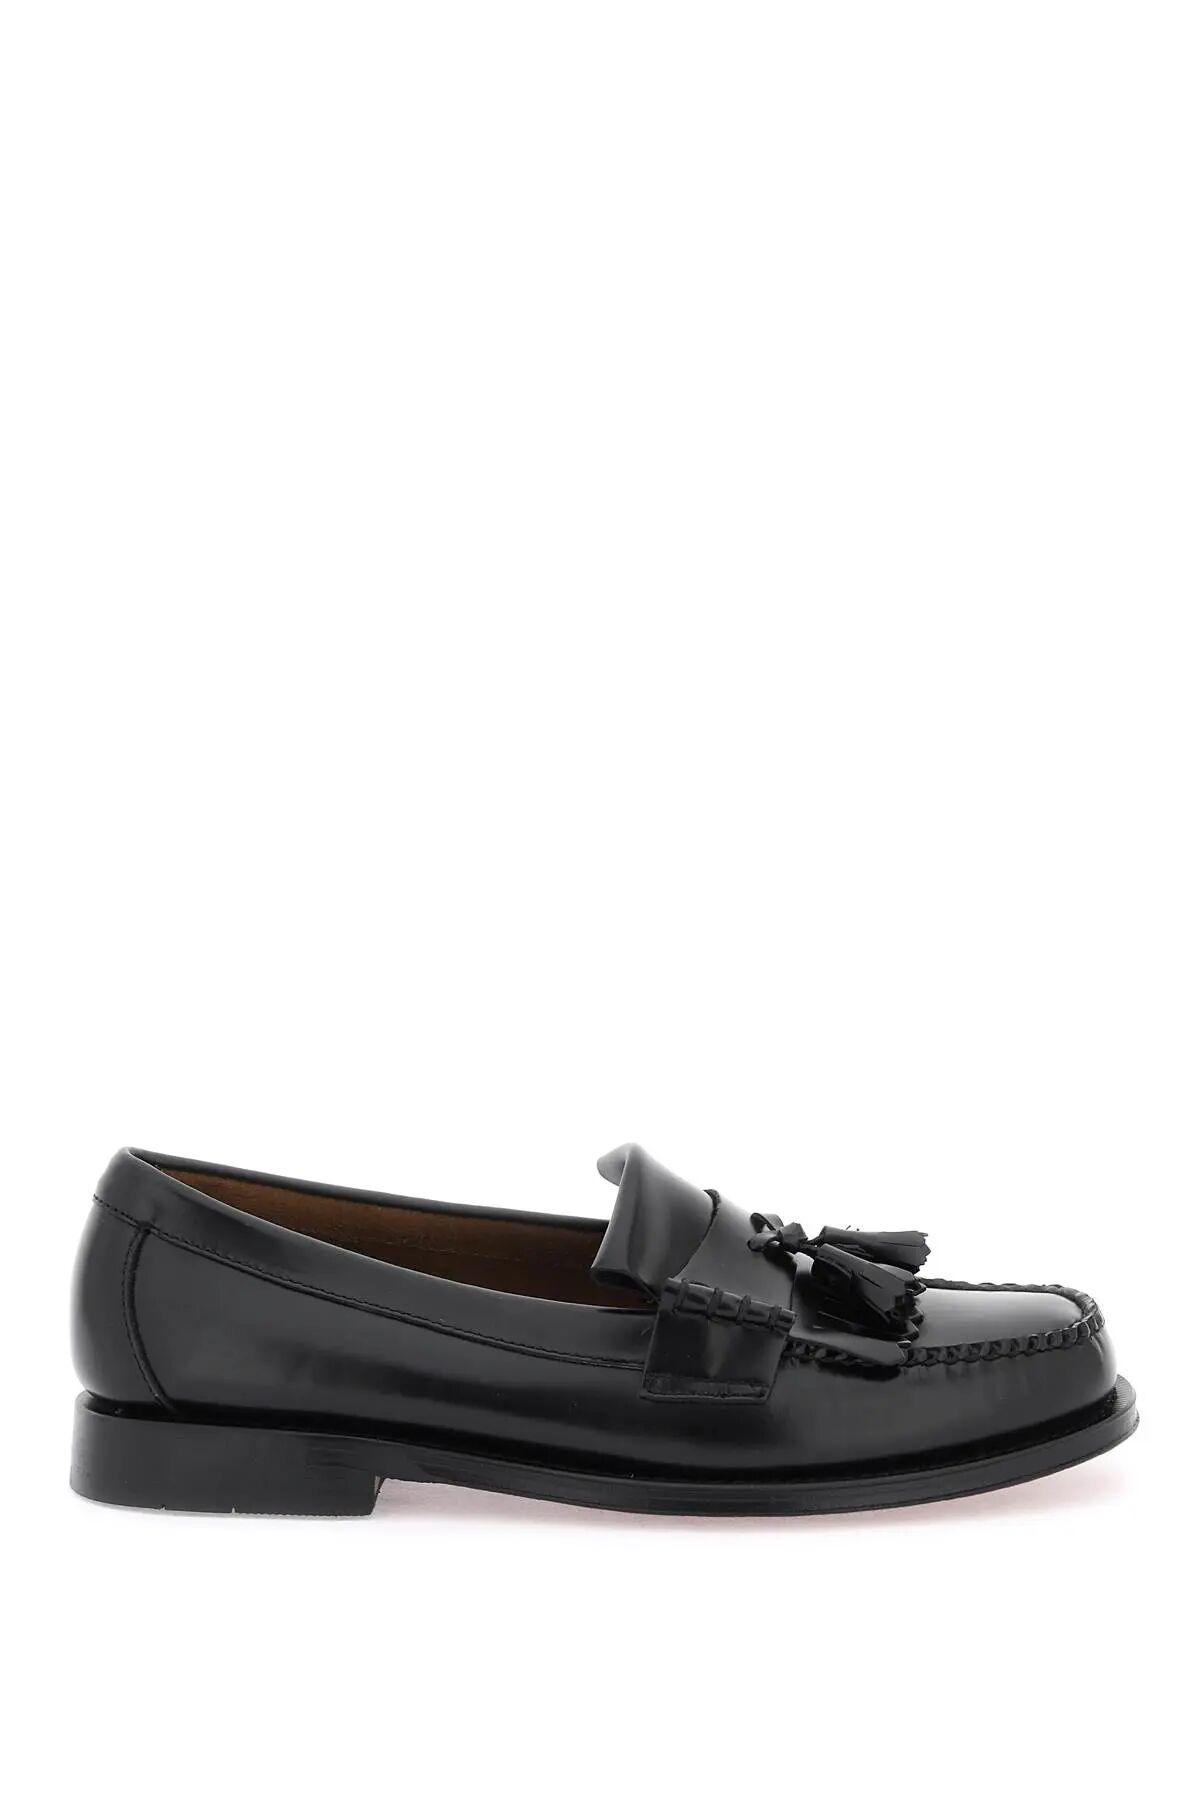 G.H. BASS Esther Kiltie Weejuns loafers  - Black - male - Size: 42,5